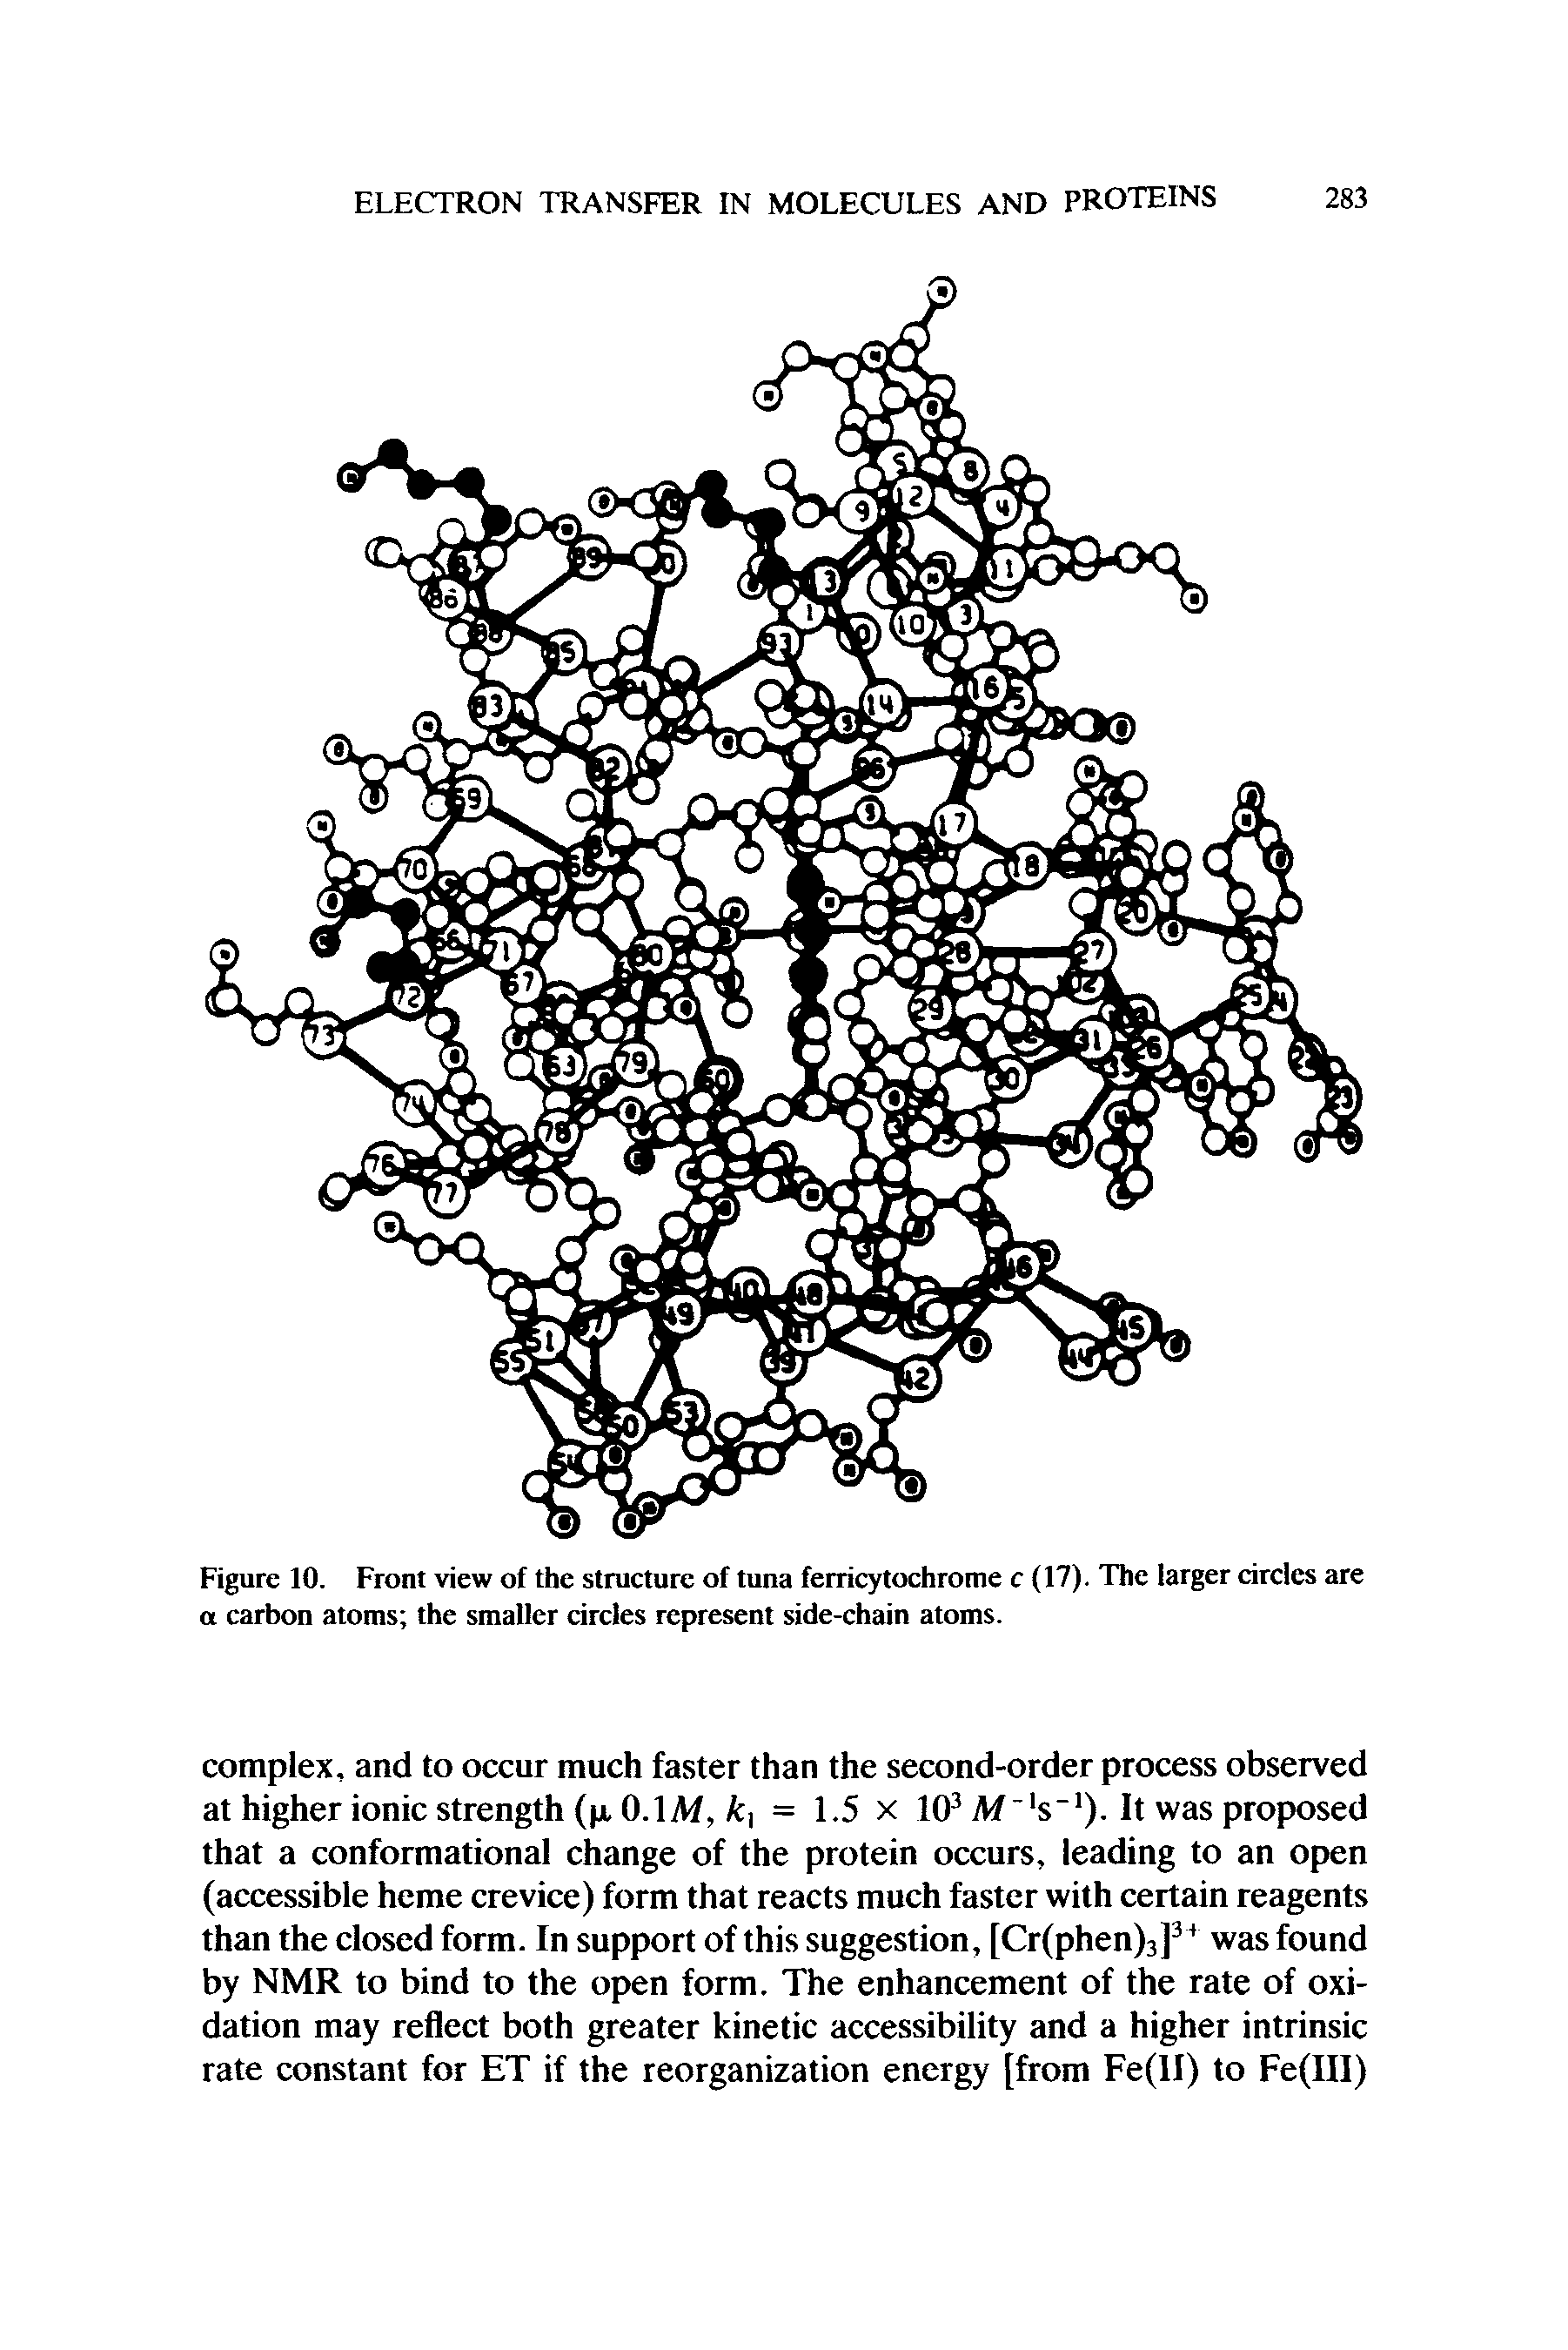 Figure 10. Front view of the structure of tuna ferricytochrome c (17). The larger eircles are a carbon atoms the smaller eircles represent side-chain atoms.